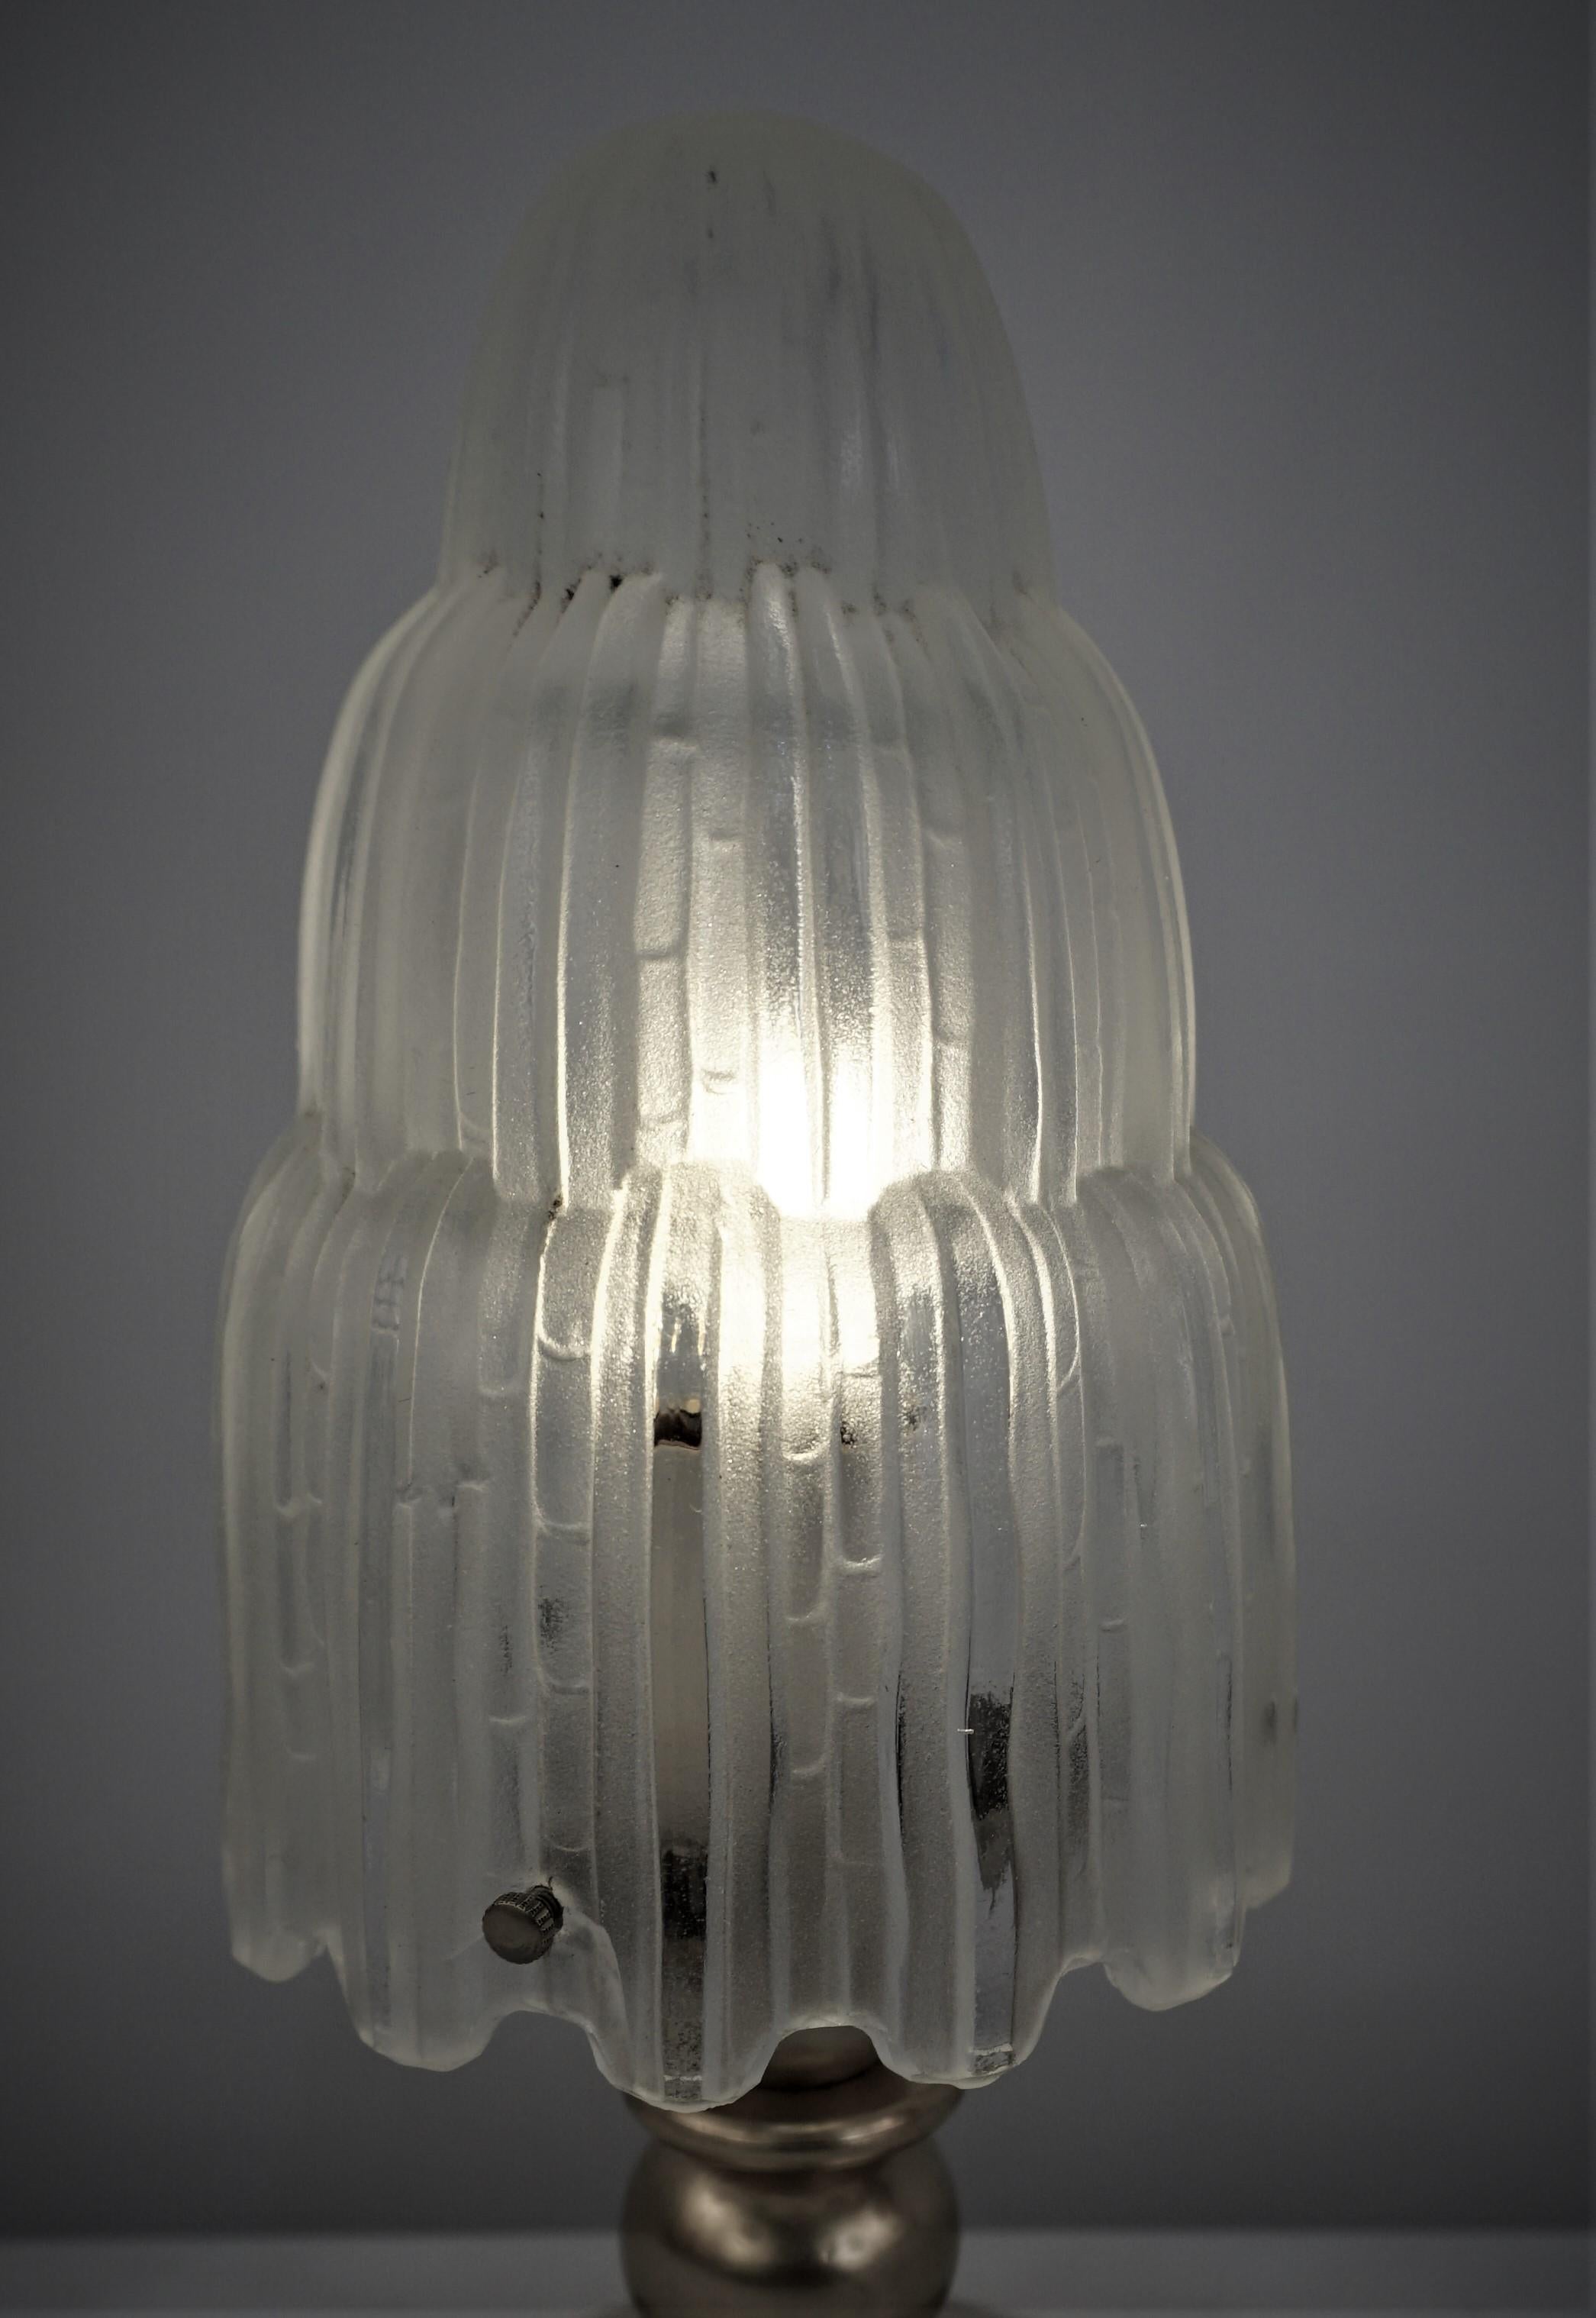 Beautiful Patit art deco waterfall table lamp by Sabino, Paris. clear frost glass on bronze base.